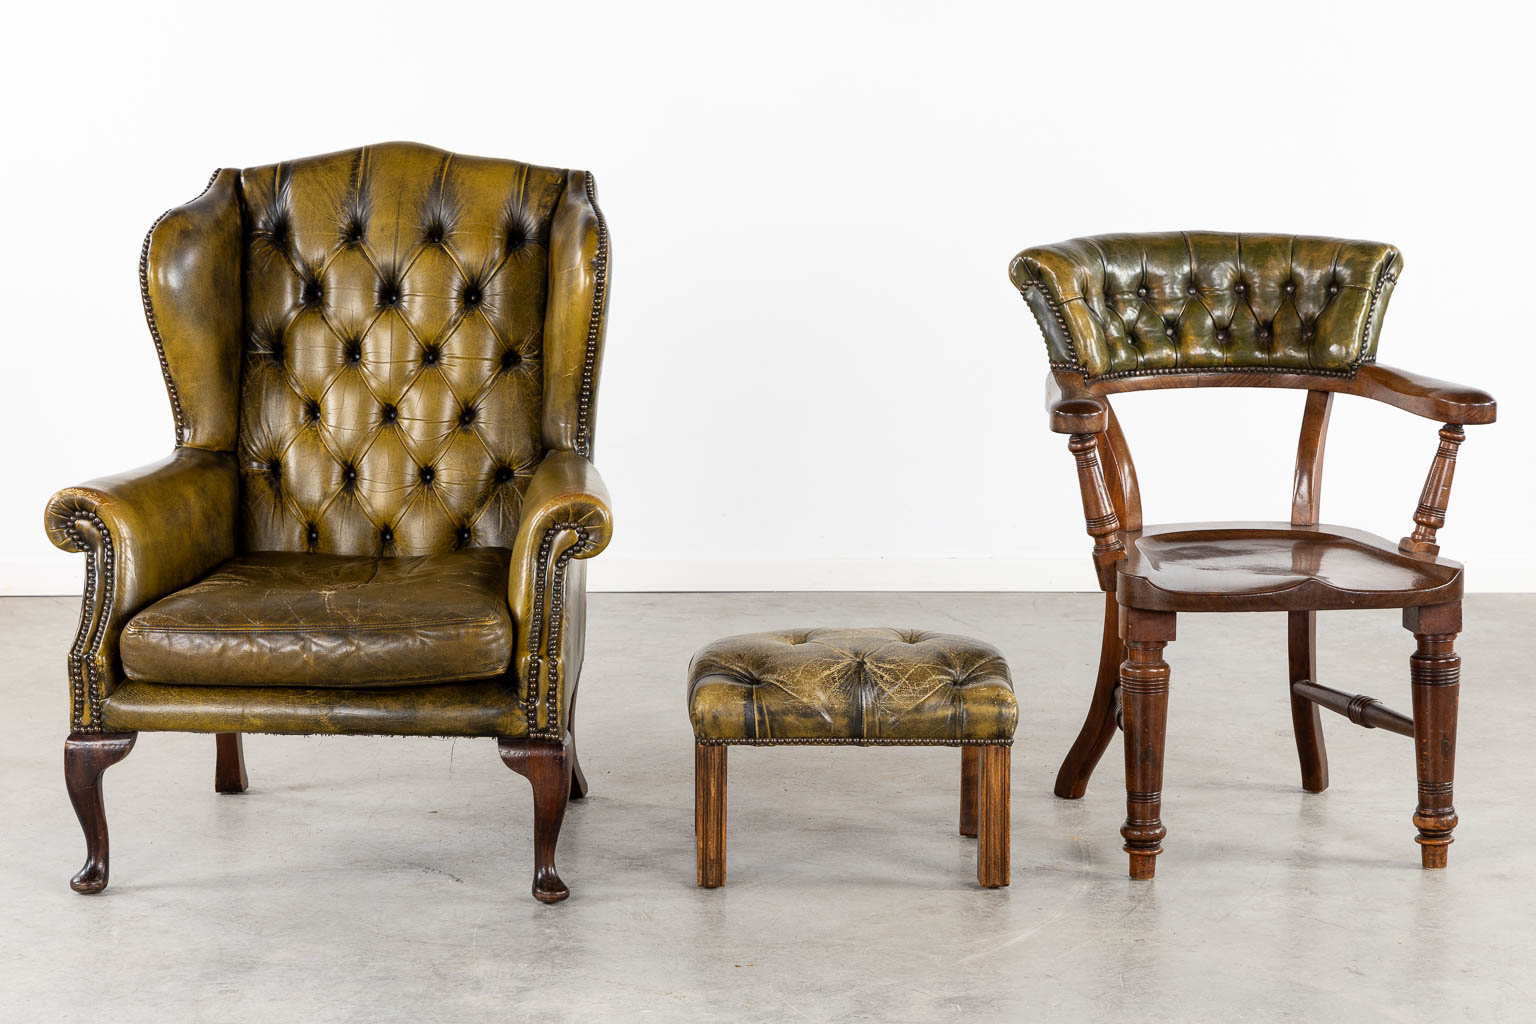 A Lounge chair, office chair and ottoman, Leather on wood, Chesterfield. (L:84 x W:80 x H:100 cm)